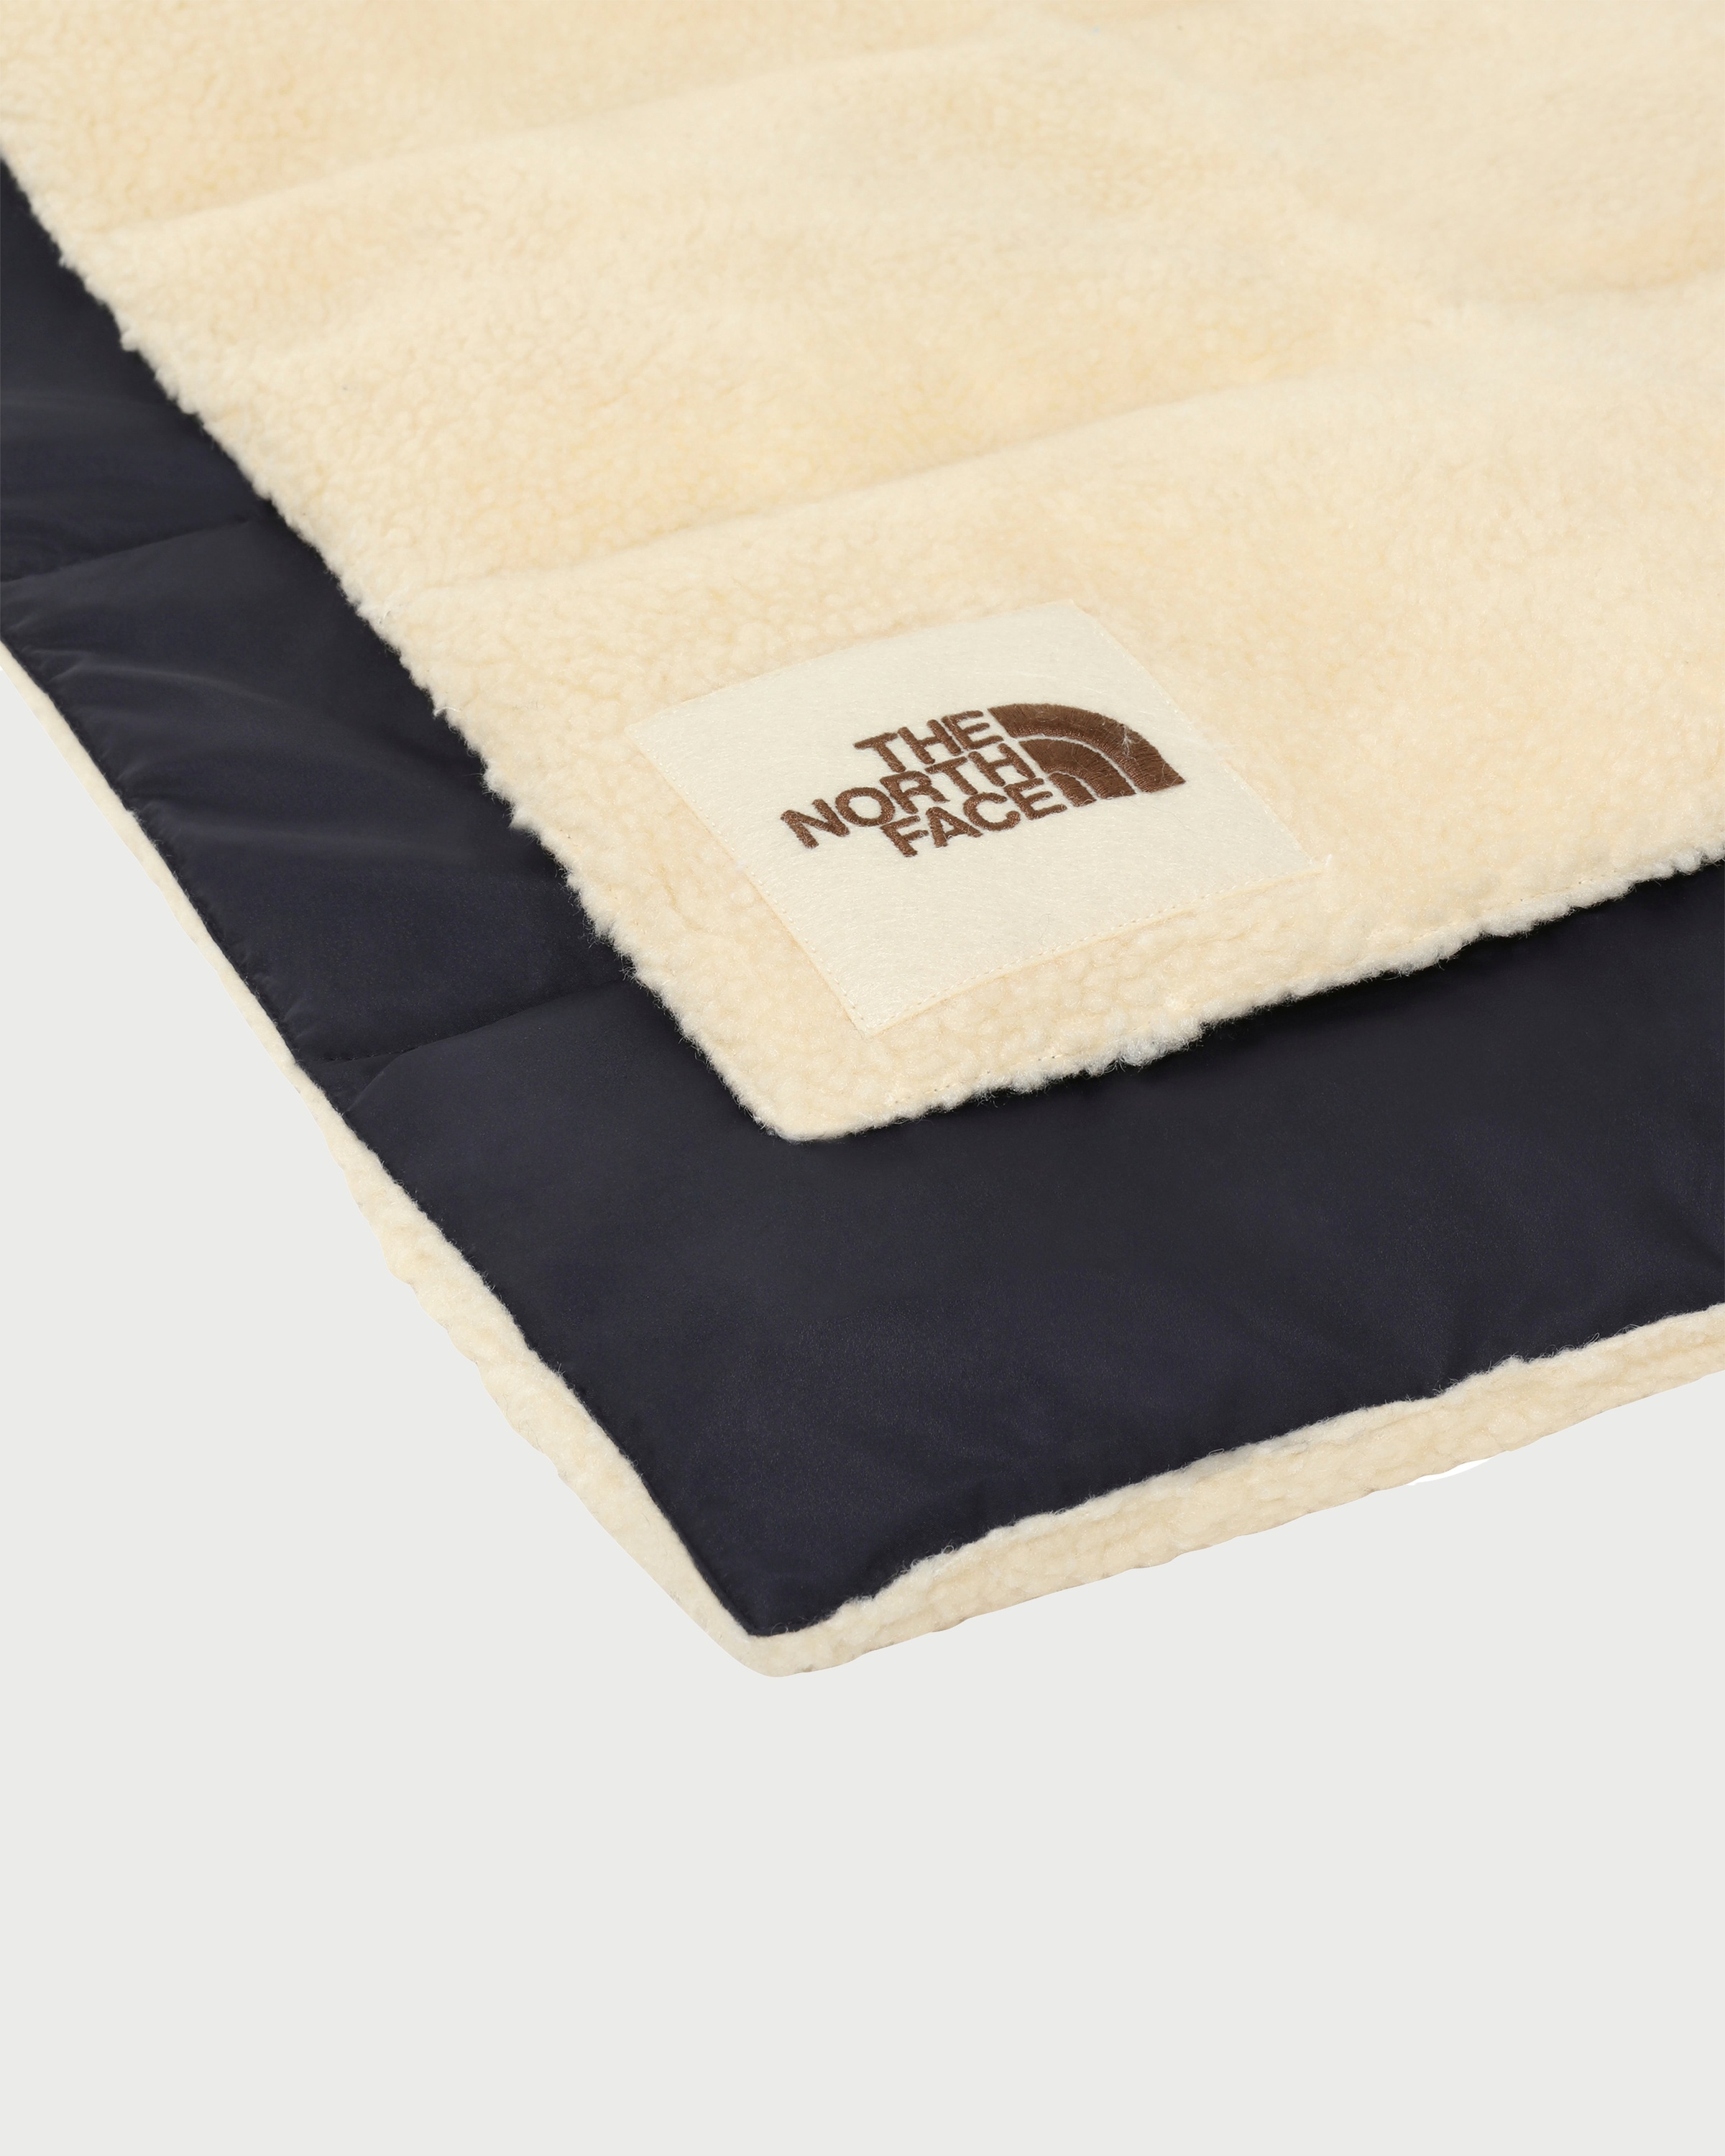 The North Face Brown Label Insulated Blanket Scarf New $199 Navy White  Unisex